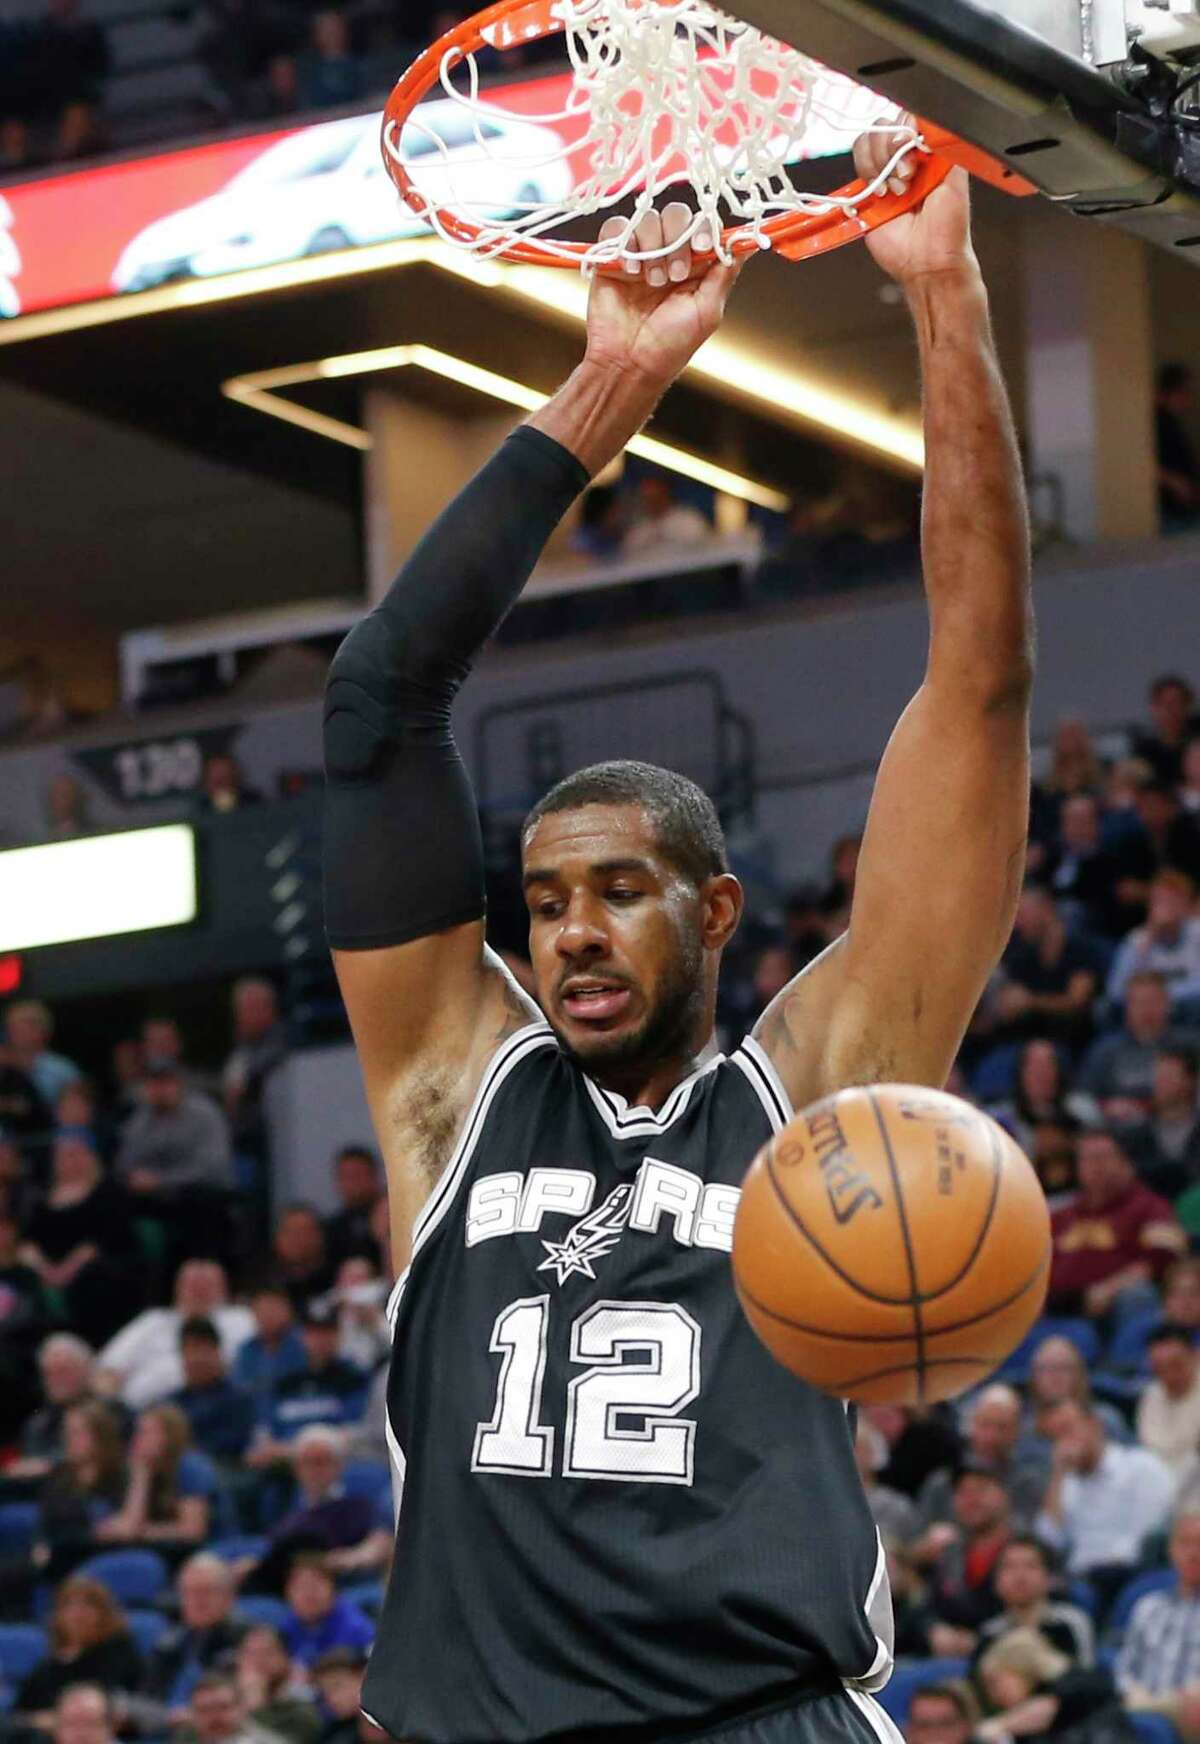 San Antonio Spurs' LaMarcus Aldridge dunks against the Minnesota Timberwolves during the first half of an NBA basketball game Tuesday, March 21, 2017, in Minneapolis. (AP Photo/Jim Mone)